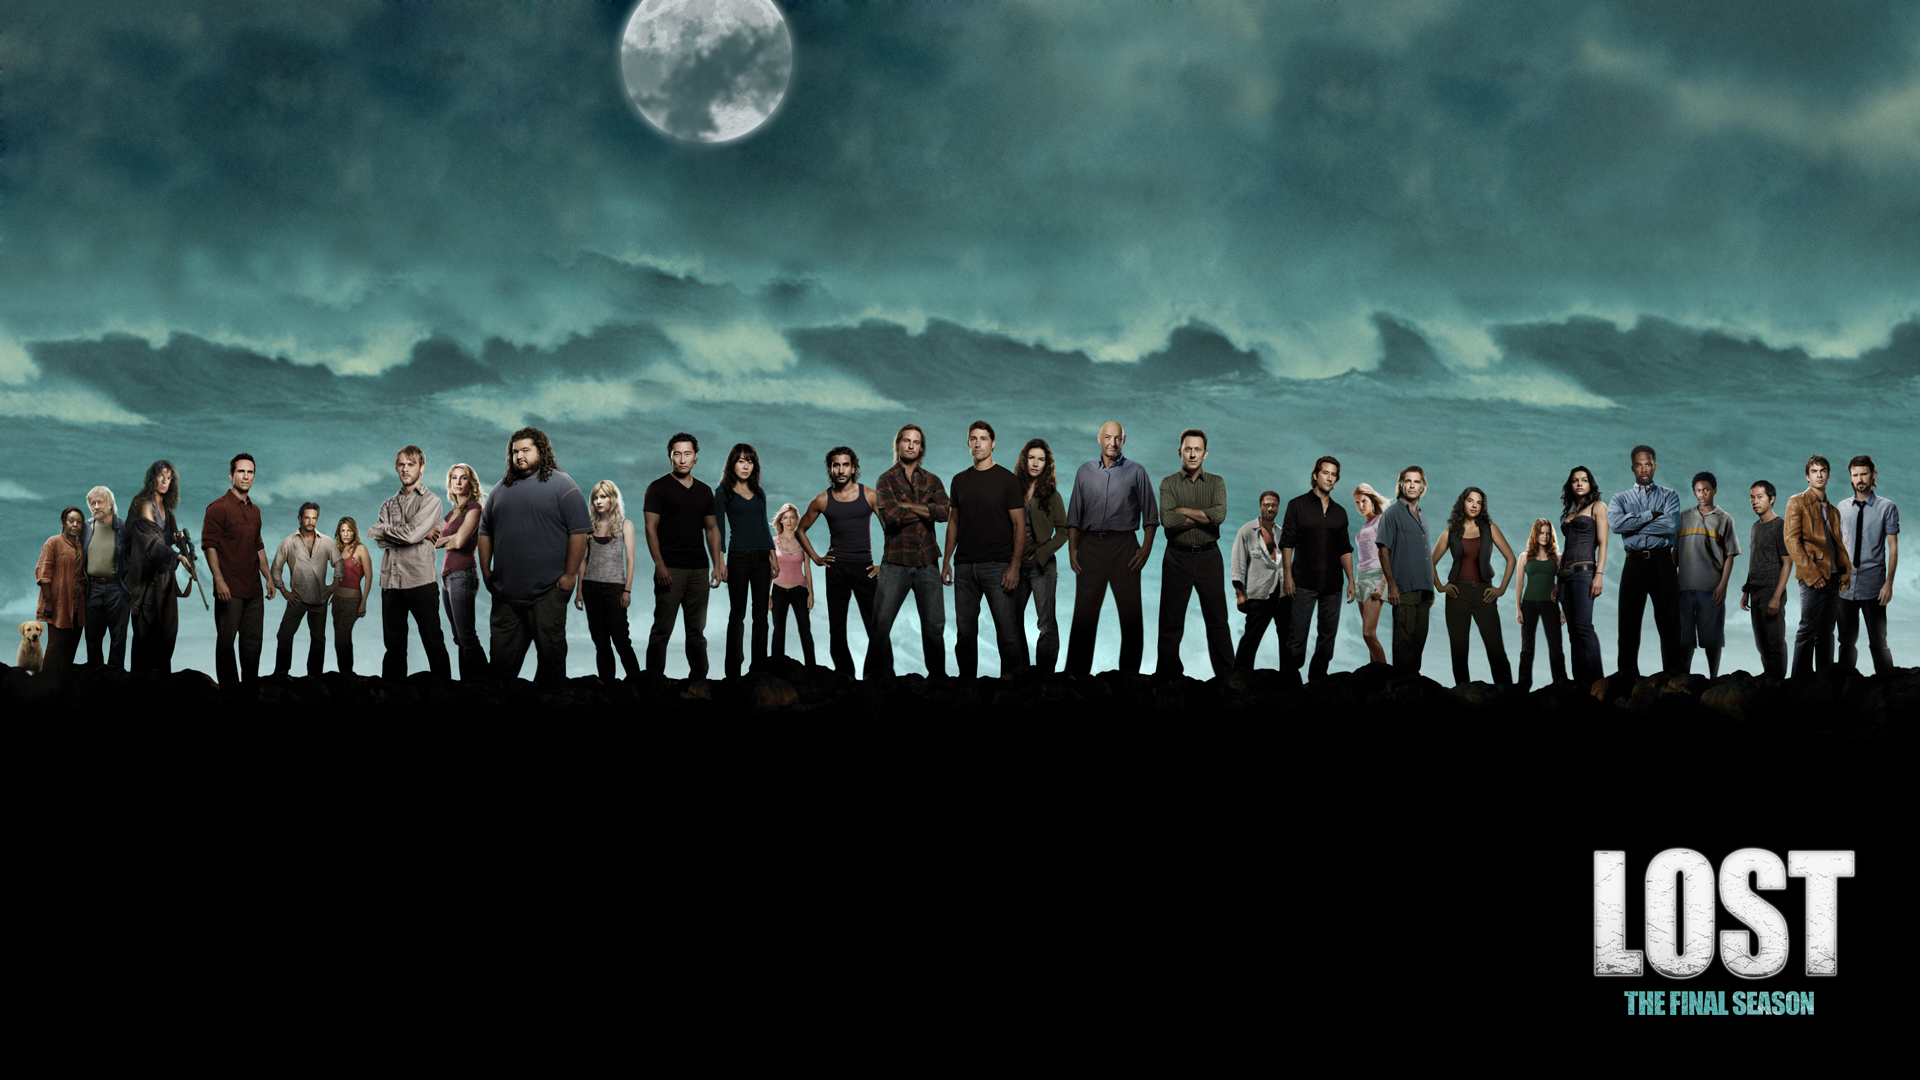 LOST_Full_Cast_with_Text_by_Wolverine080976.png